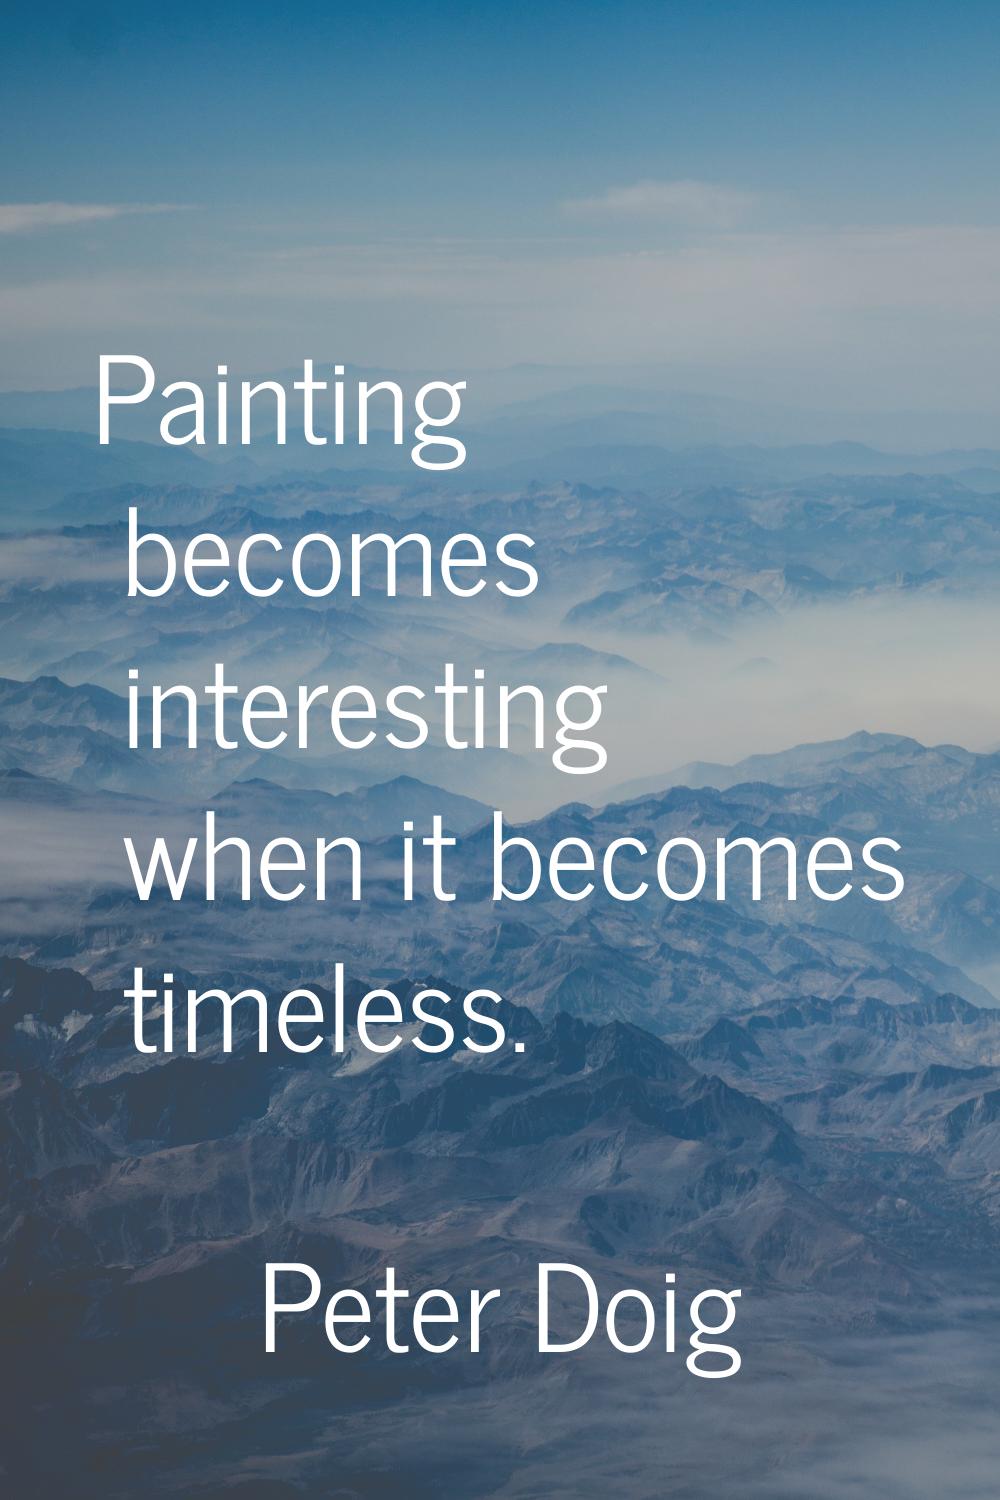 Painting becomes interesting when it becomes timeless.